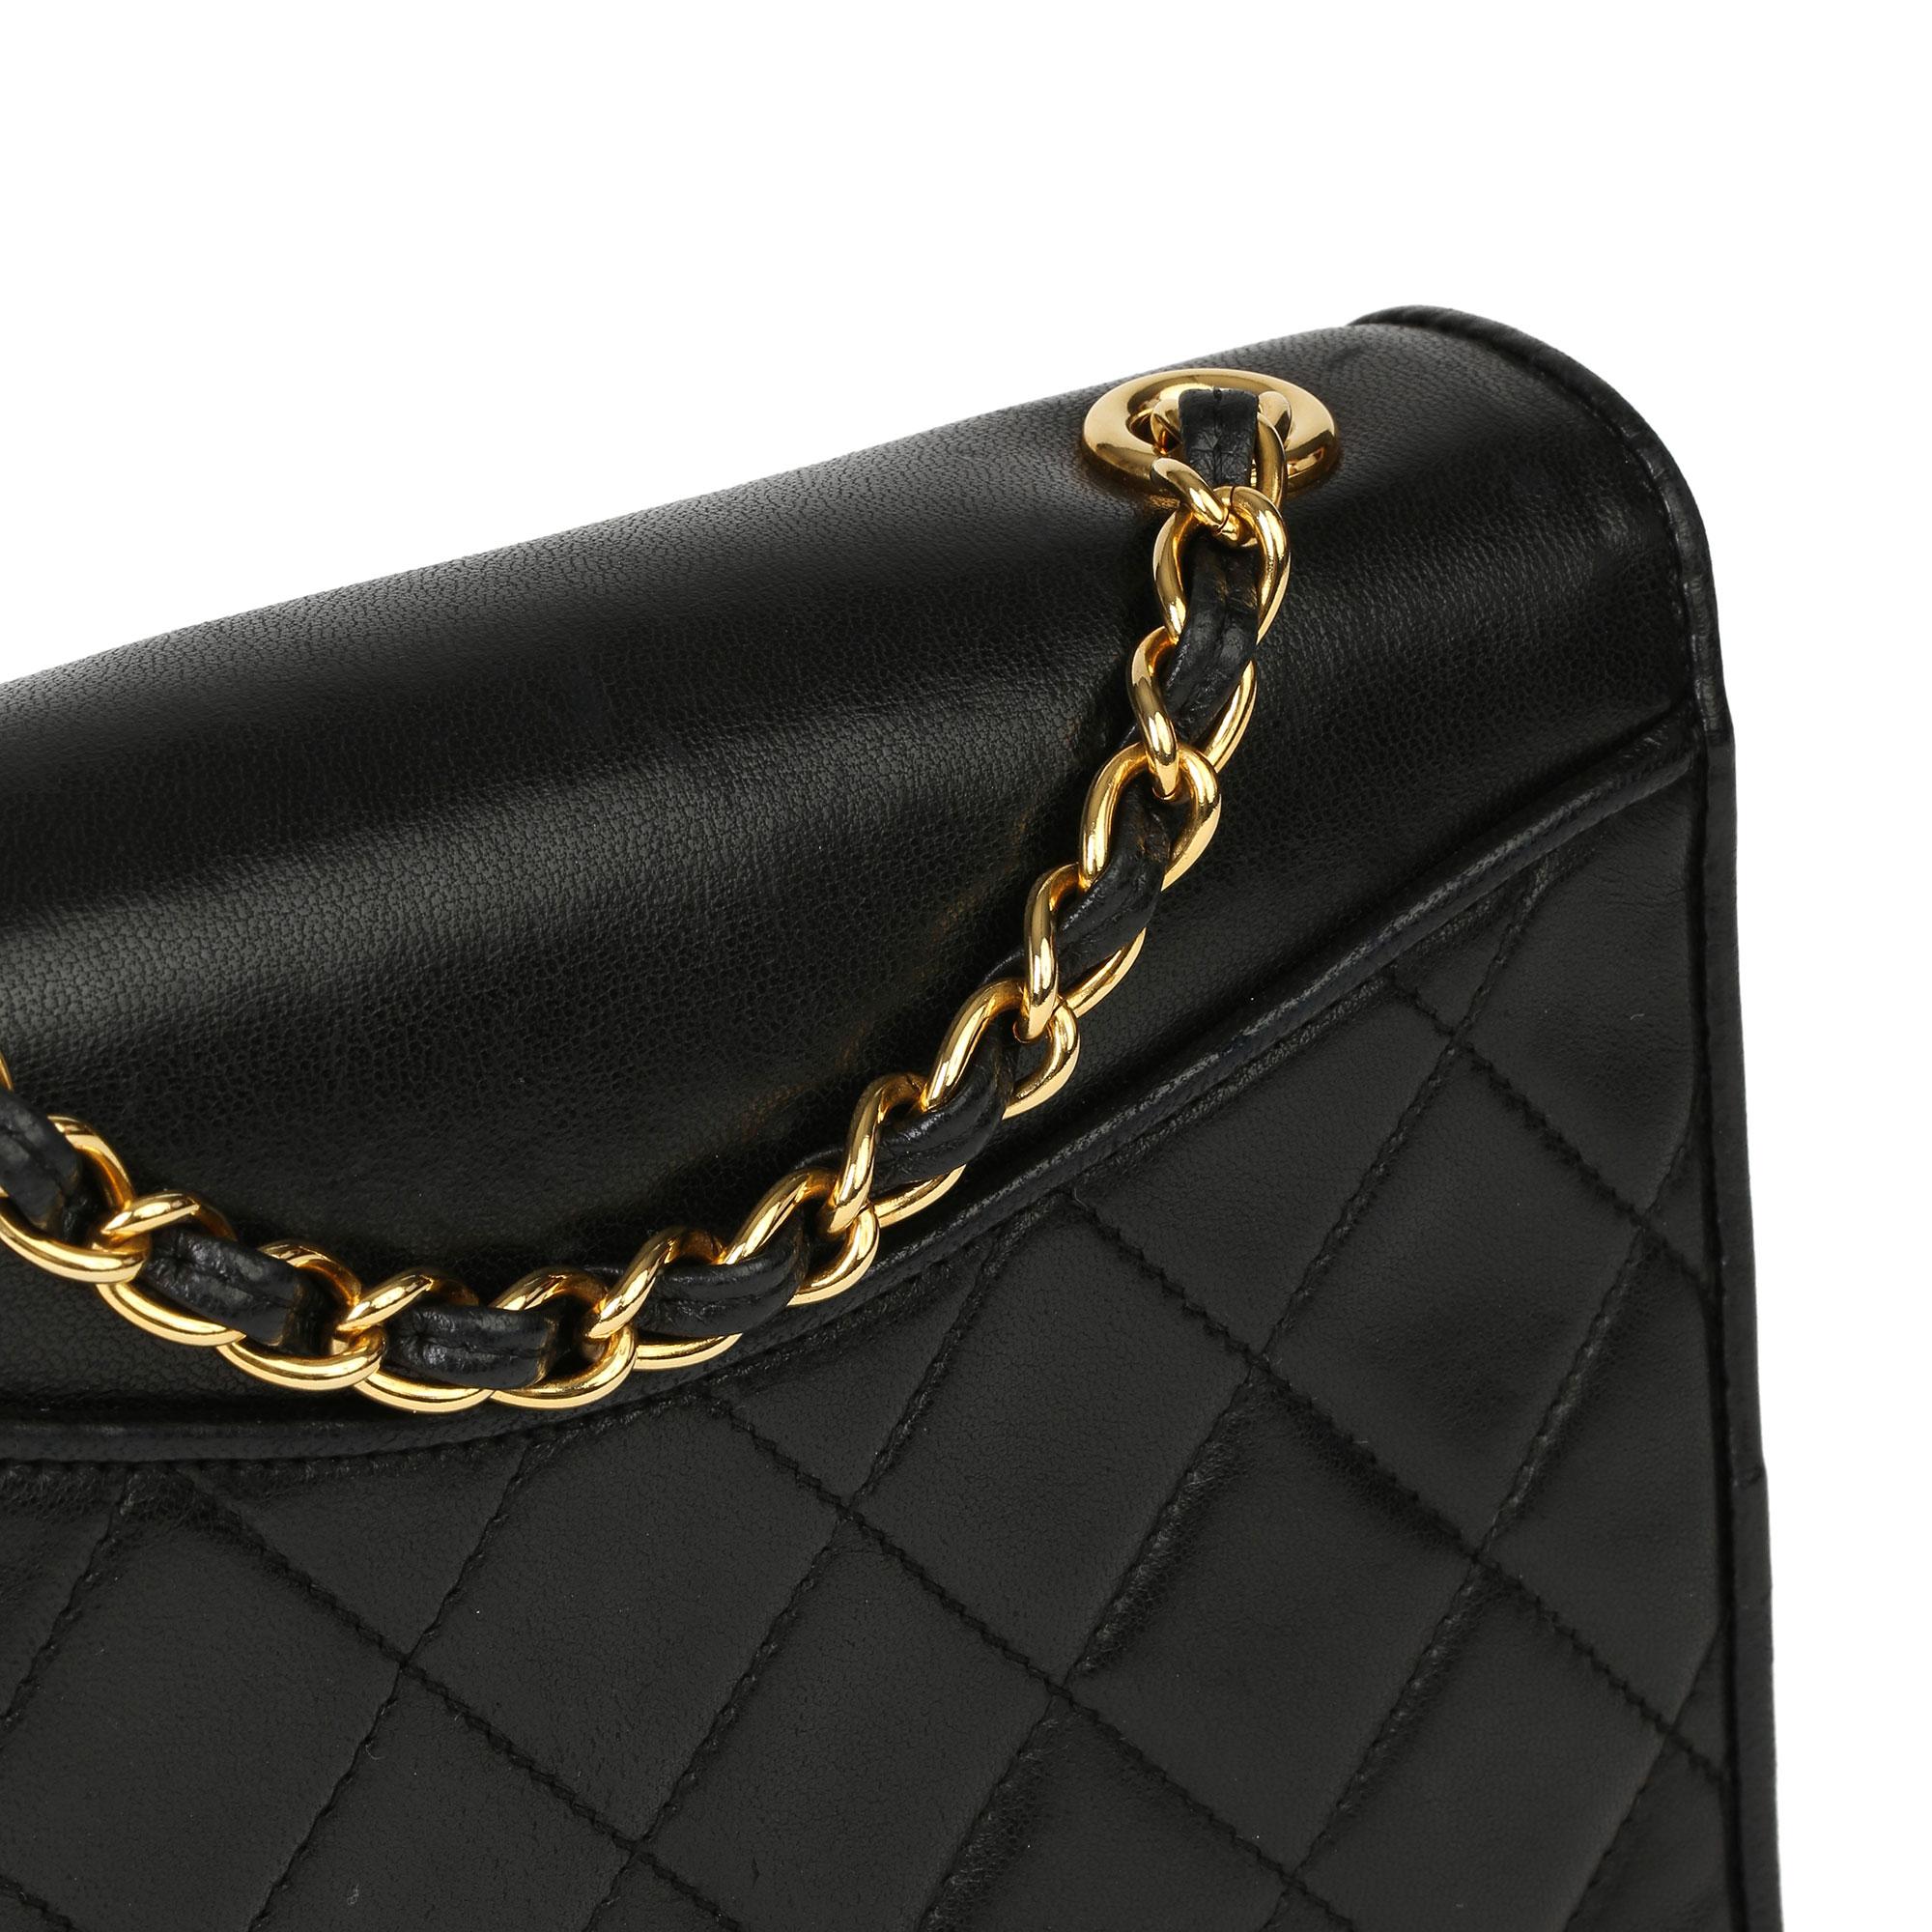 CHANEL
Black Quilted Lambskin Vintage Timeless Single Flap Bag 

Xupes Reference: HB3976
Serial Number: 1150056
Age (Circa): 1989
Accompanied By: Chanel Dust Bag
Authenticity Details: Serial Sticker (Made in Italy) 
Gender: Ladies
Type: